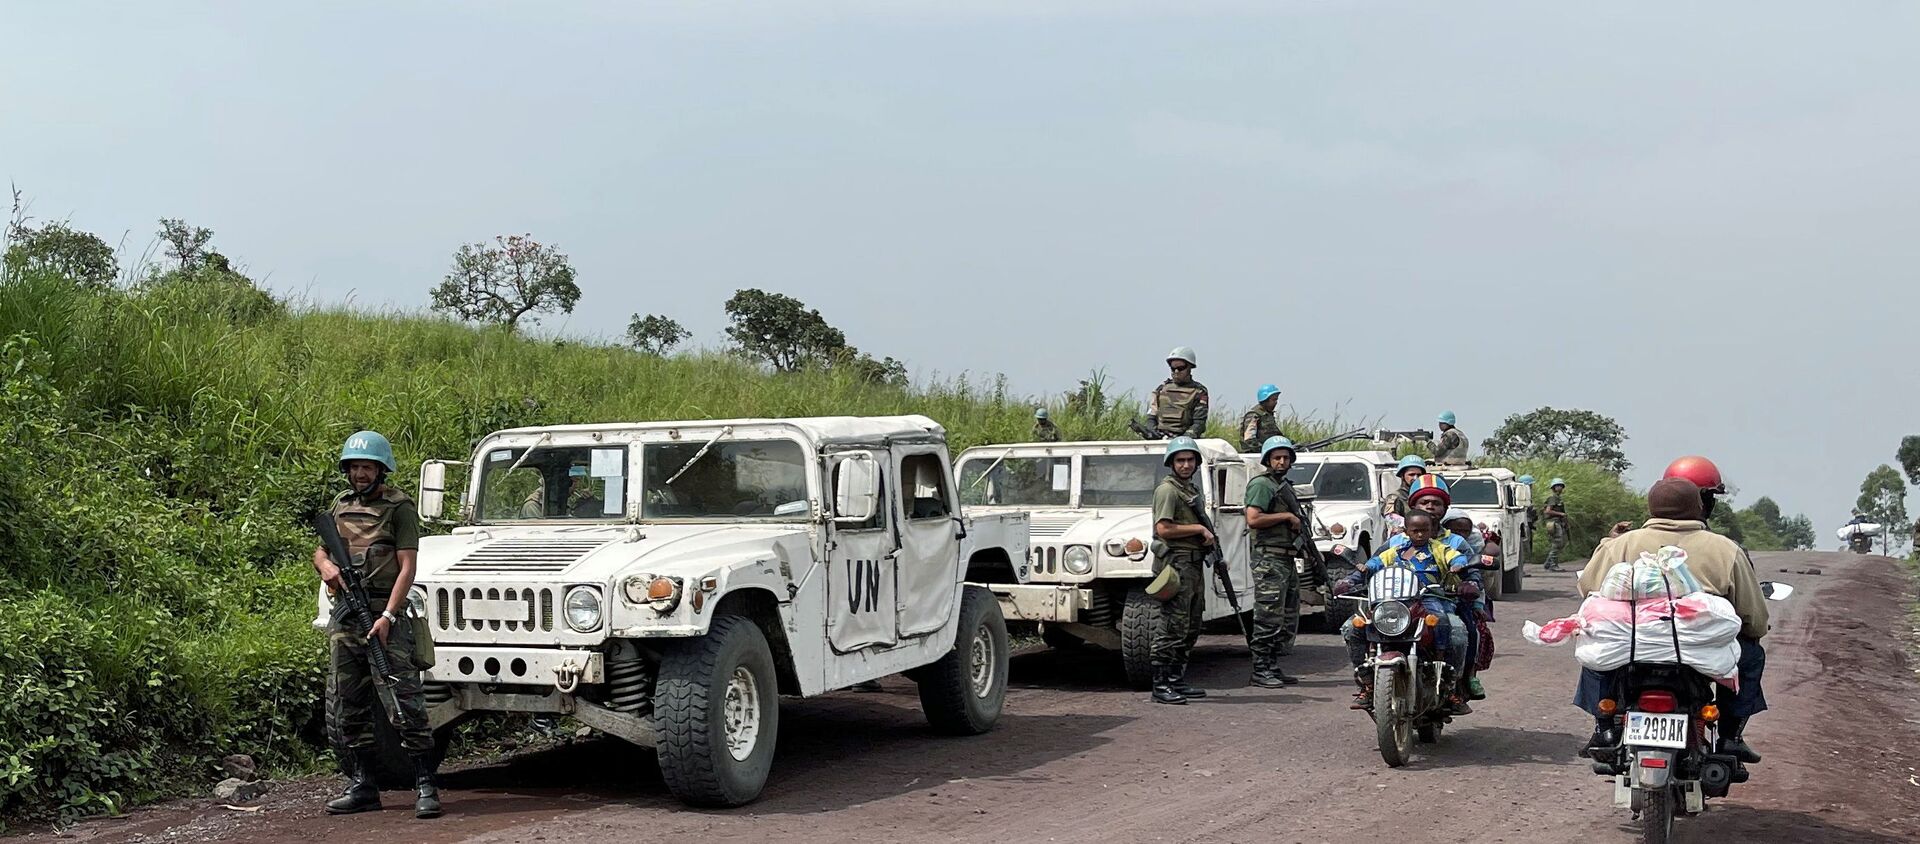 Peacekeepers serving in the United Nations Organization Stabilization Mission in the Democratic Republic of the Congo (MONUSCO) secure the scene where the Italian ambassador to Democratic Republic of Congo Luca Attanasio, Italian military policeman Vittorio Iacovacci and Congolese driver Moustapha Milambo from the World Food Programme were killed in an attempted kidnap when their convoy was attacked in Ruhimba village, eastern Democratic Republic of the Congo February 22, 2021. - Sputnik International, 1920, 22.02.2021